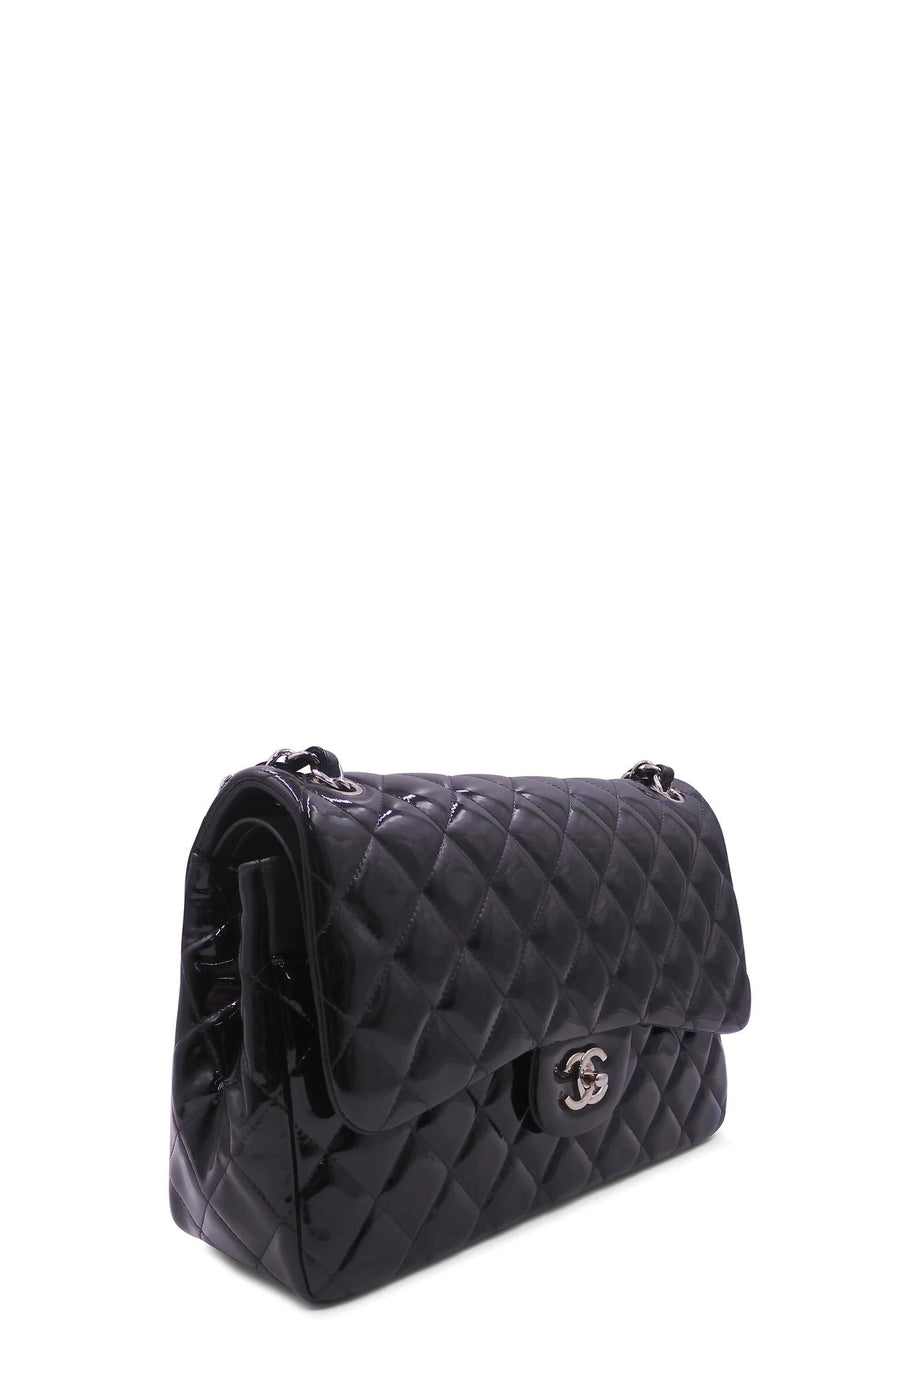 Buy Authentic, Preloved Chanel Quilted Patent Jumbo Classic Flap